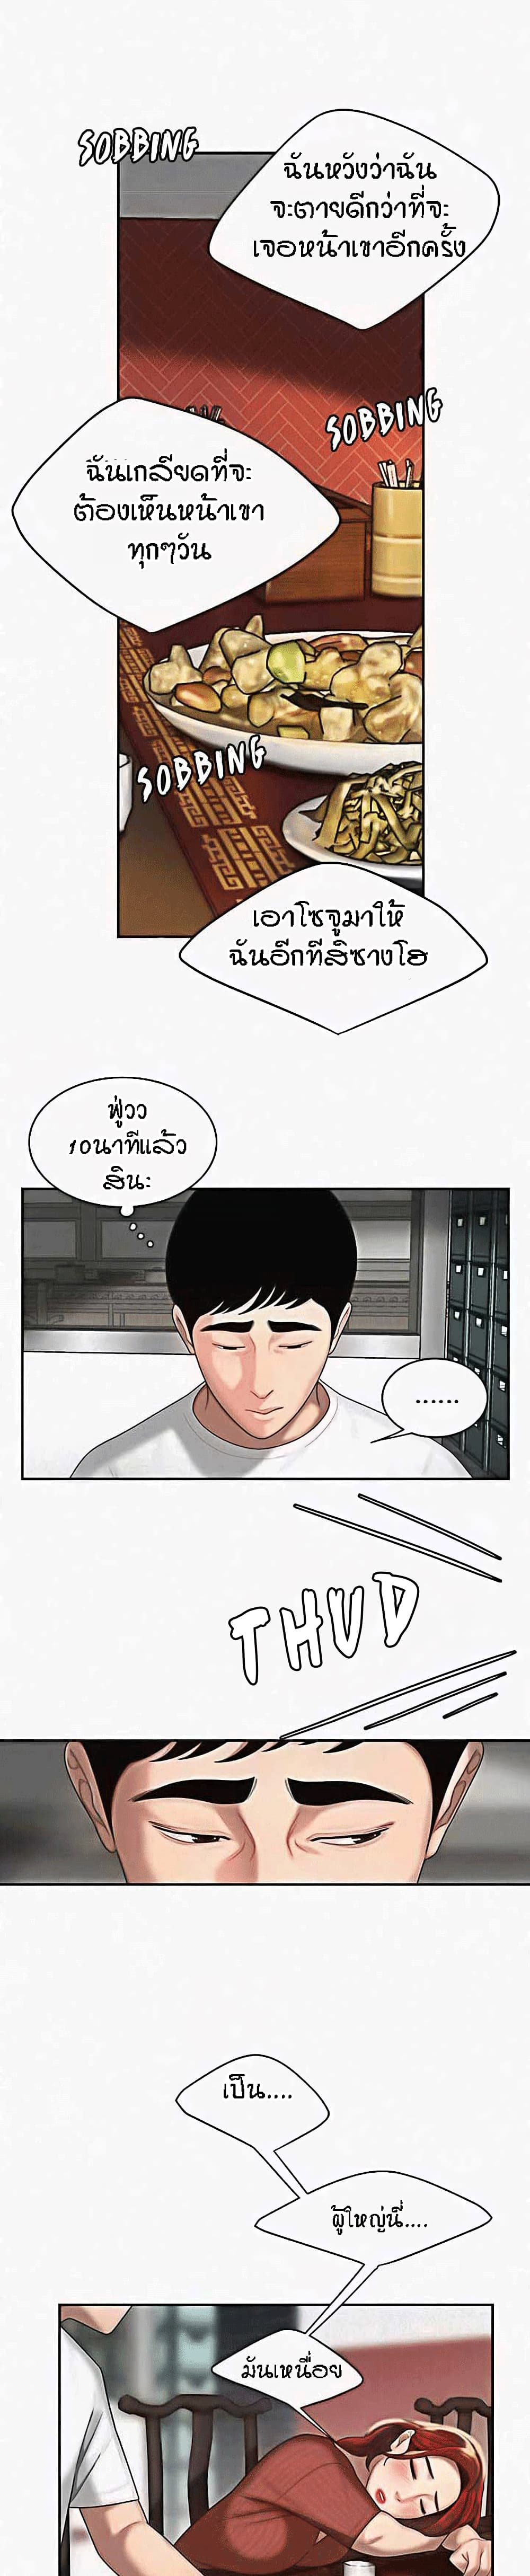 Delivery Man 1 (26)